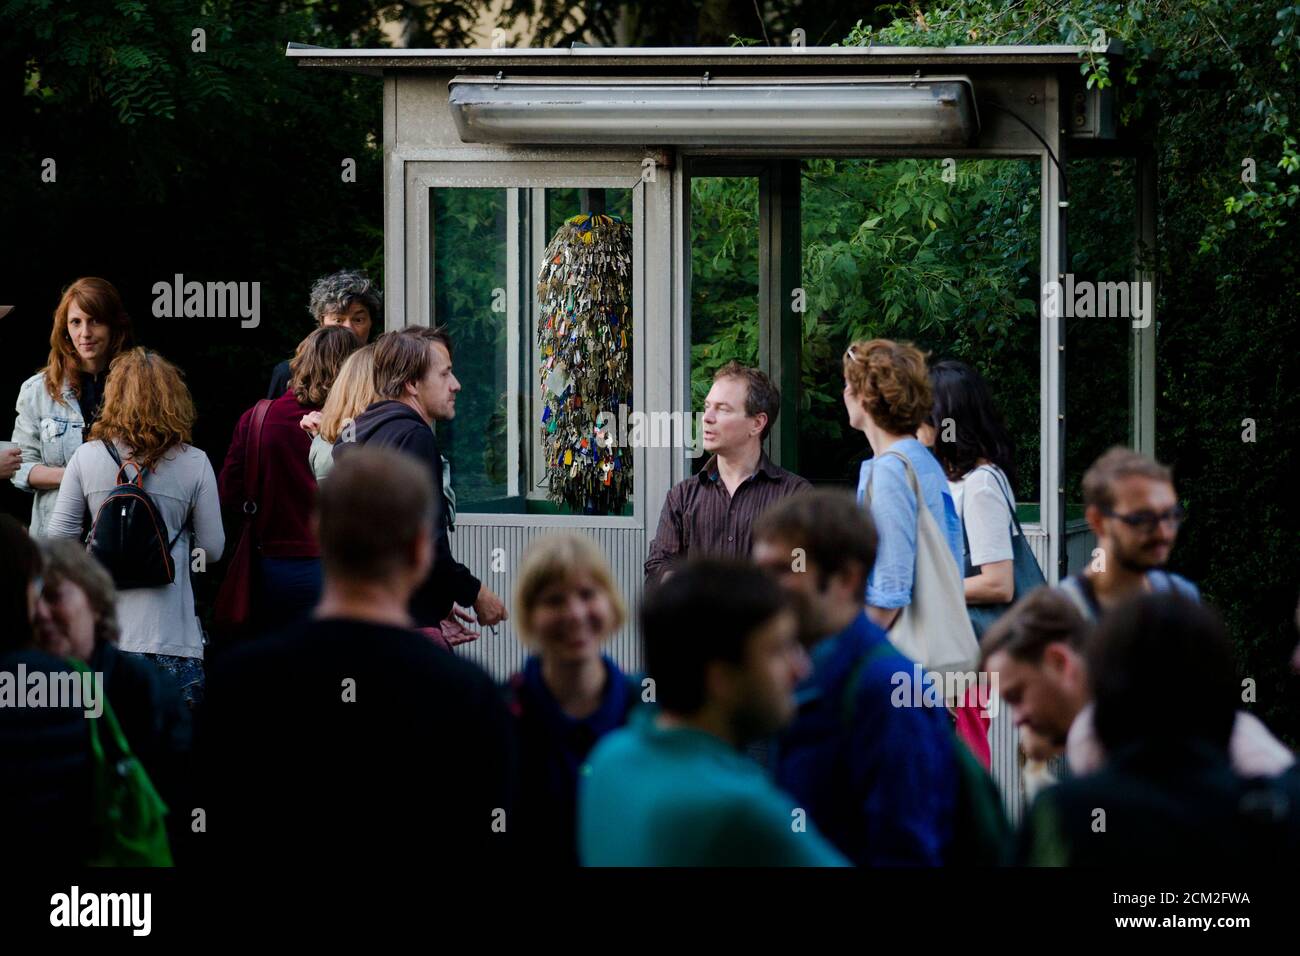 People attend the opening of an installation of keys, used in Stasi police barracks, by Sonya Schoenberger (L), that is installed inside Christoph Zwiener's exhibition project 'ADN Guard House' in Berlin July 11, 2014. A German artist has turned a tiny surveillance booth used by the communist regime in the former East Germany to monitor citizens into an art exhibit and venue, which will be installed in a museum near Los Angeles dedicated to the Cold War. The one-person guardhouse measuring 2 m by 1 m (2 yards by 1 yard) was originally located in the parking lot of state-run news agency ADN so  Stock Photo